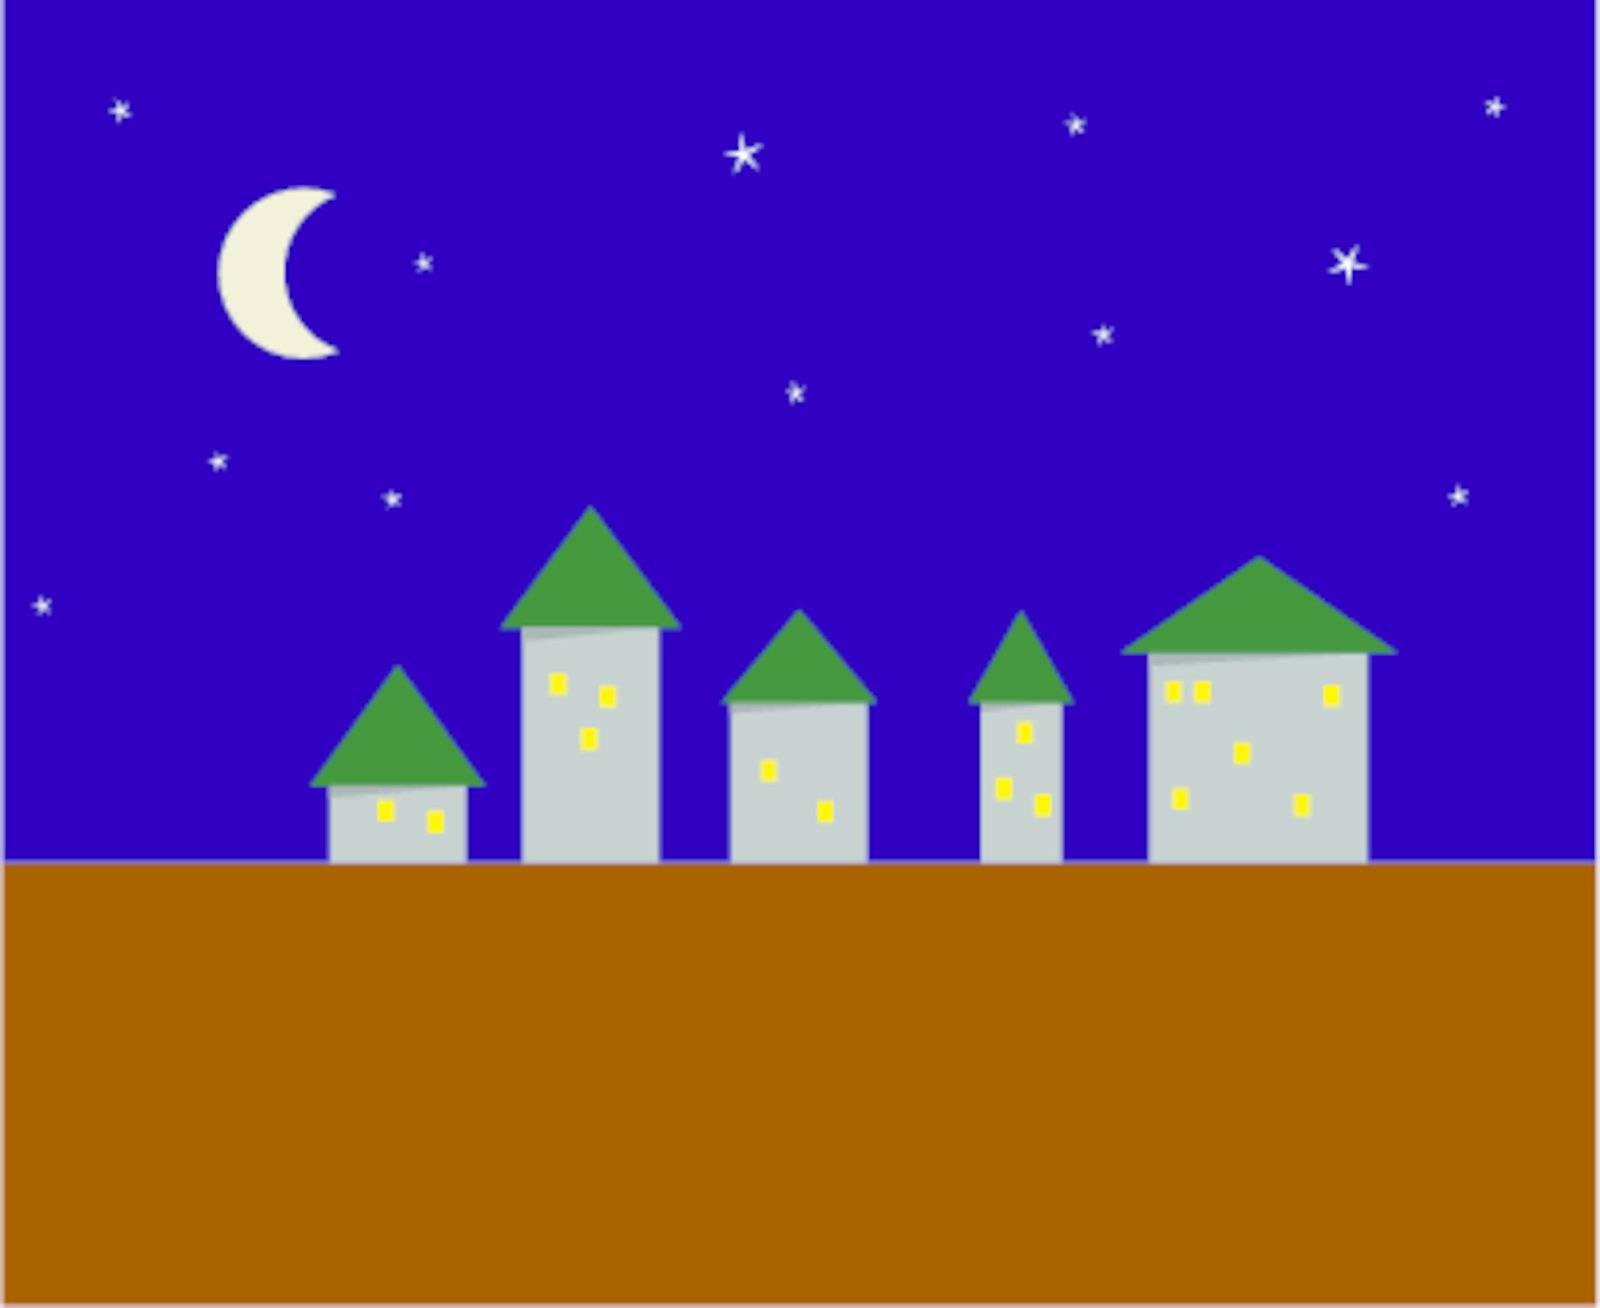 The stylized image of a night small city - five houses